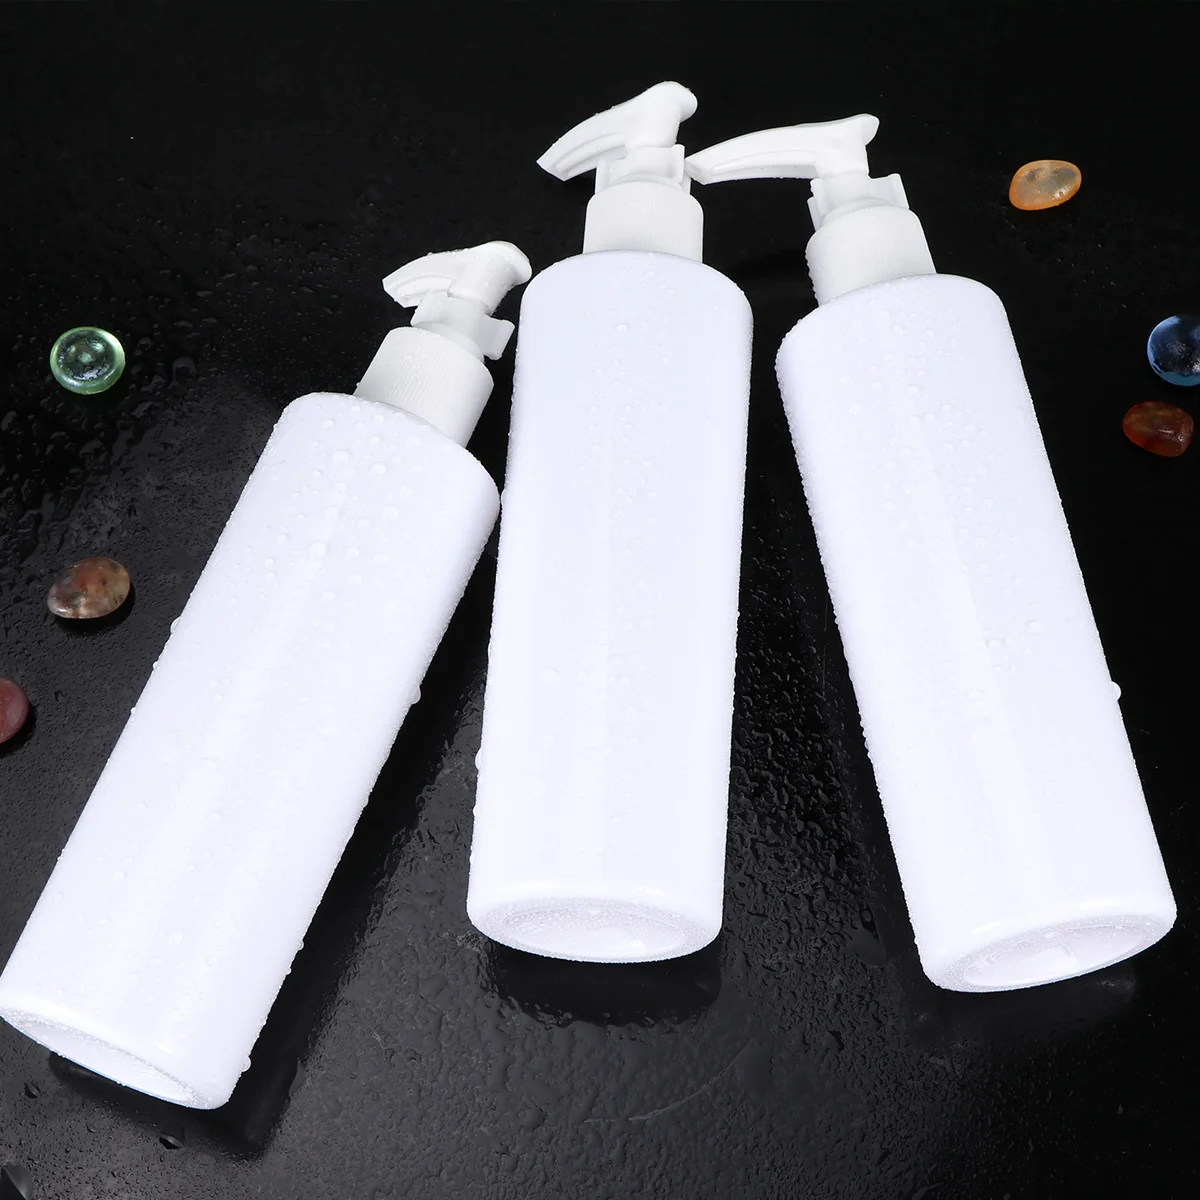 6PCS Travel Bottles 250ML Lotion Dispenser Bottle Multi- Pressure Lotion Subpackaging Pump Bottle for Dorm Hotel Home Kitchen portable air conditioner fan evaporative cooler cooling machine 3 speed with 7 5hrs timer with remote control for room home office dorm